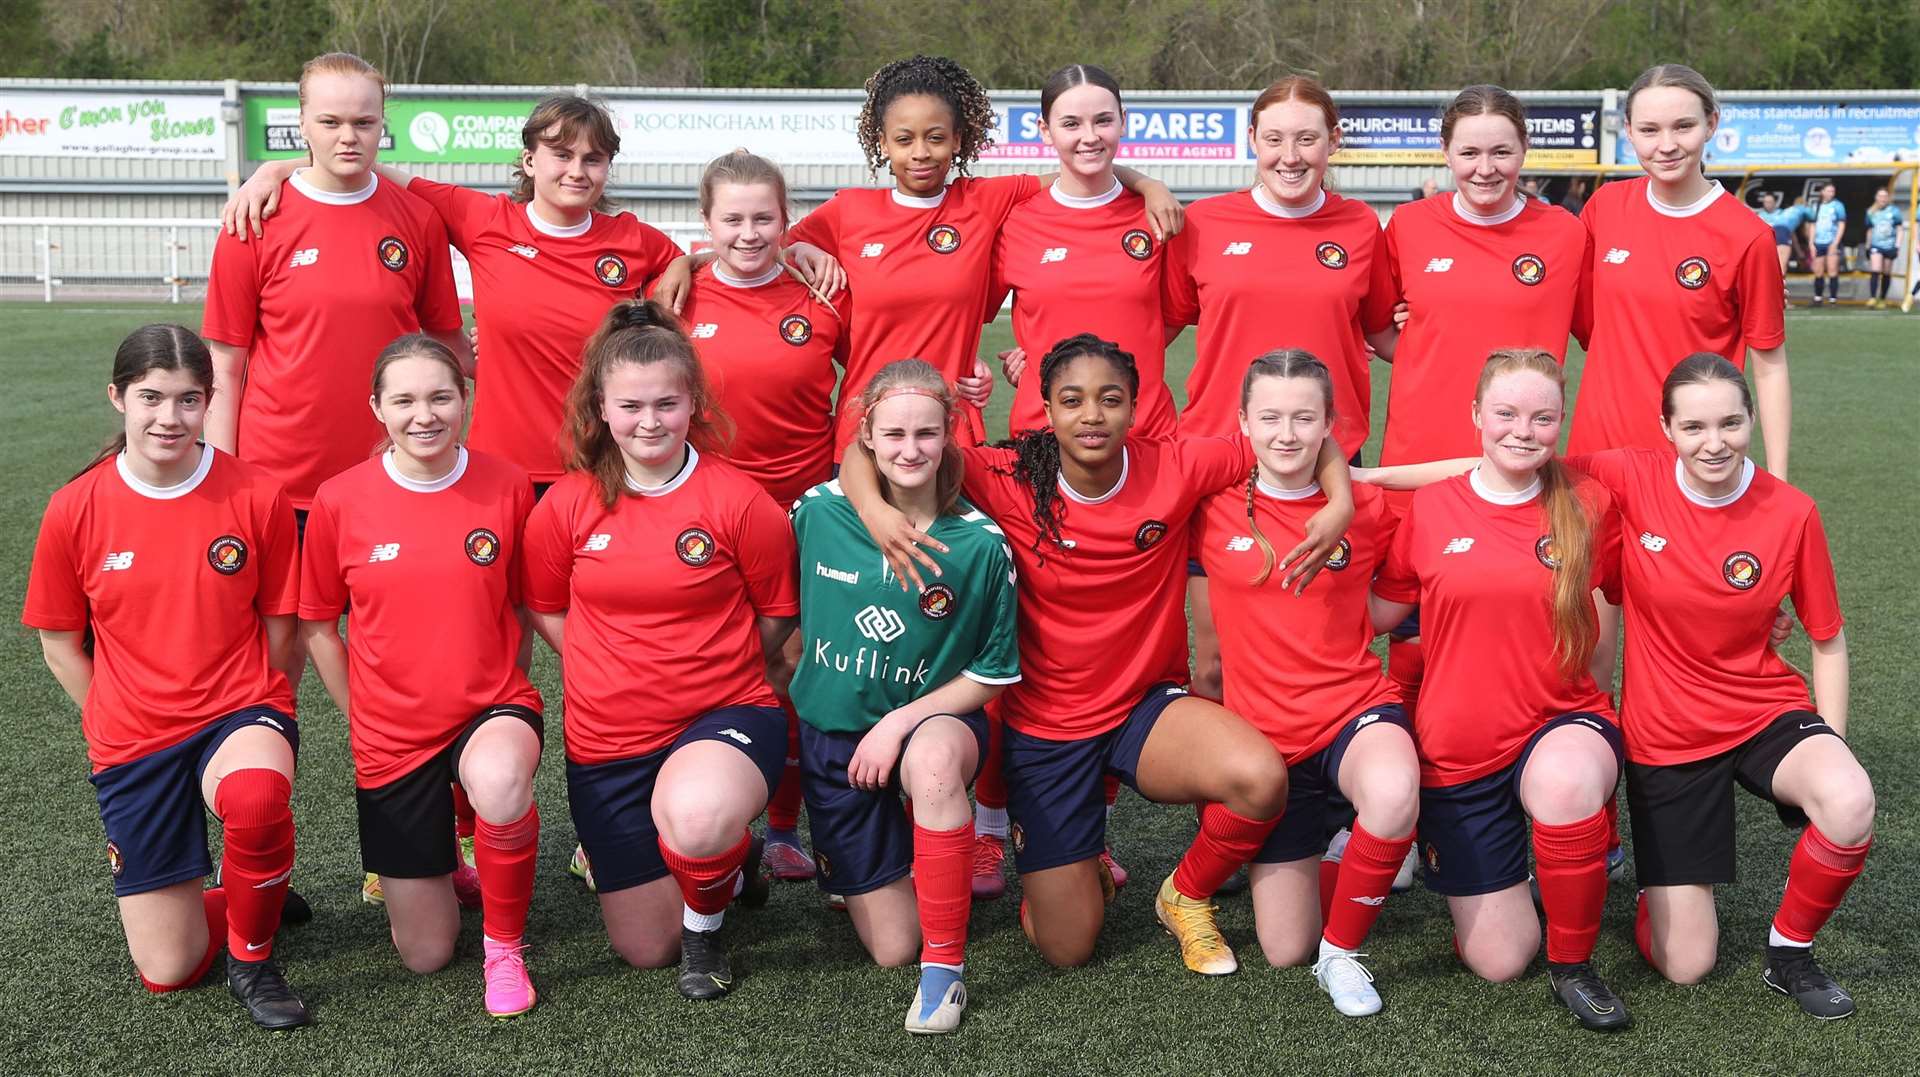 Ebbsfleet United - defeated in the Kent Merit Under-16 Girls Cup Final. Picture: PSP Images